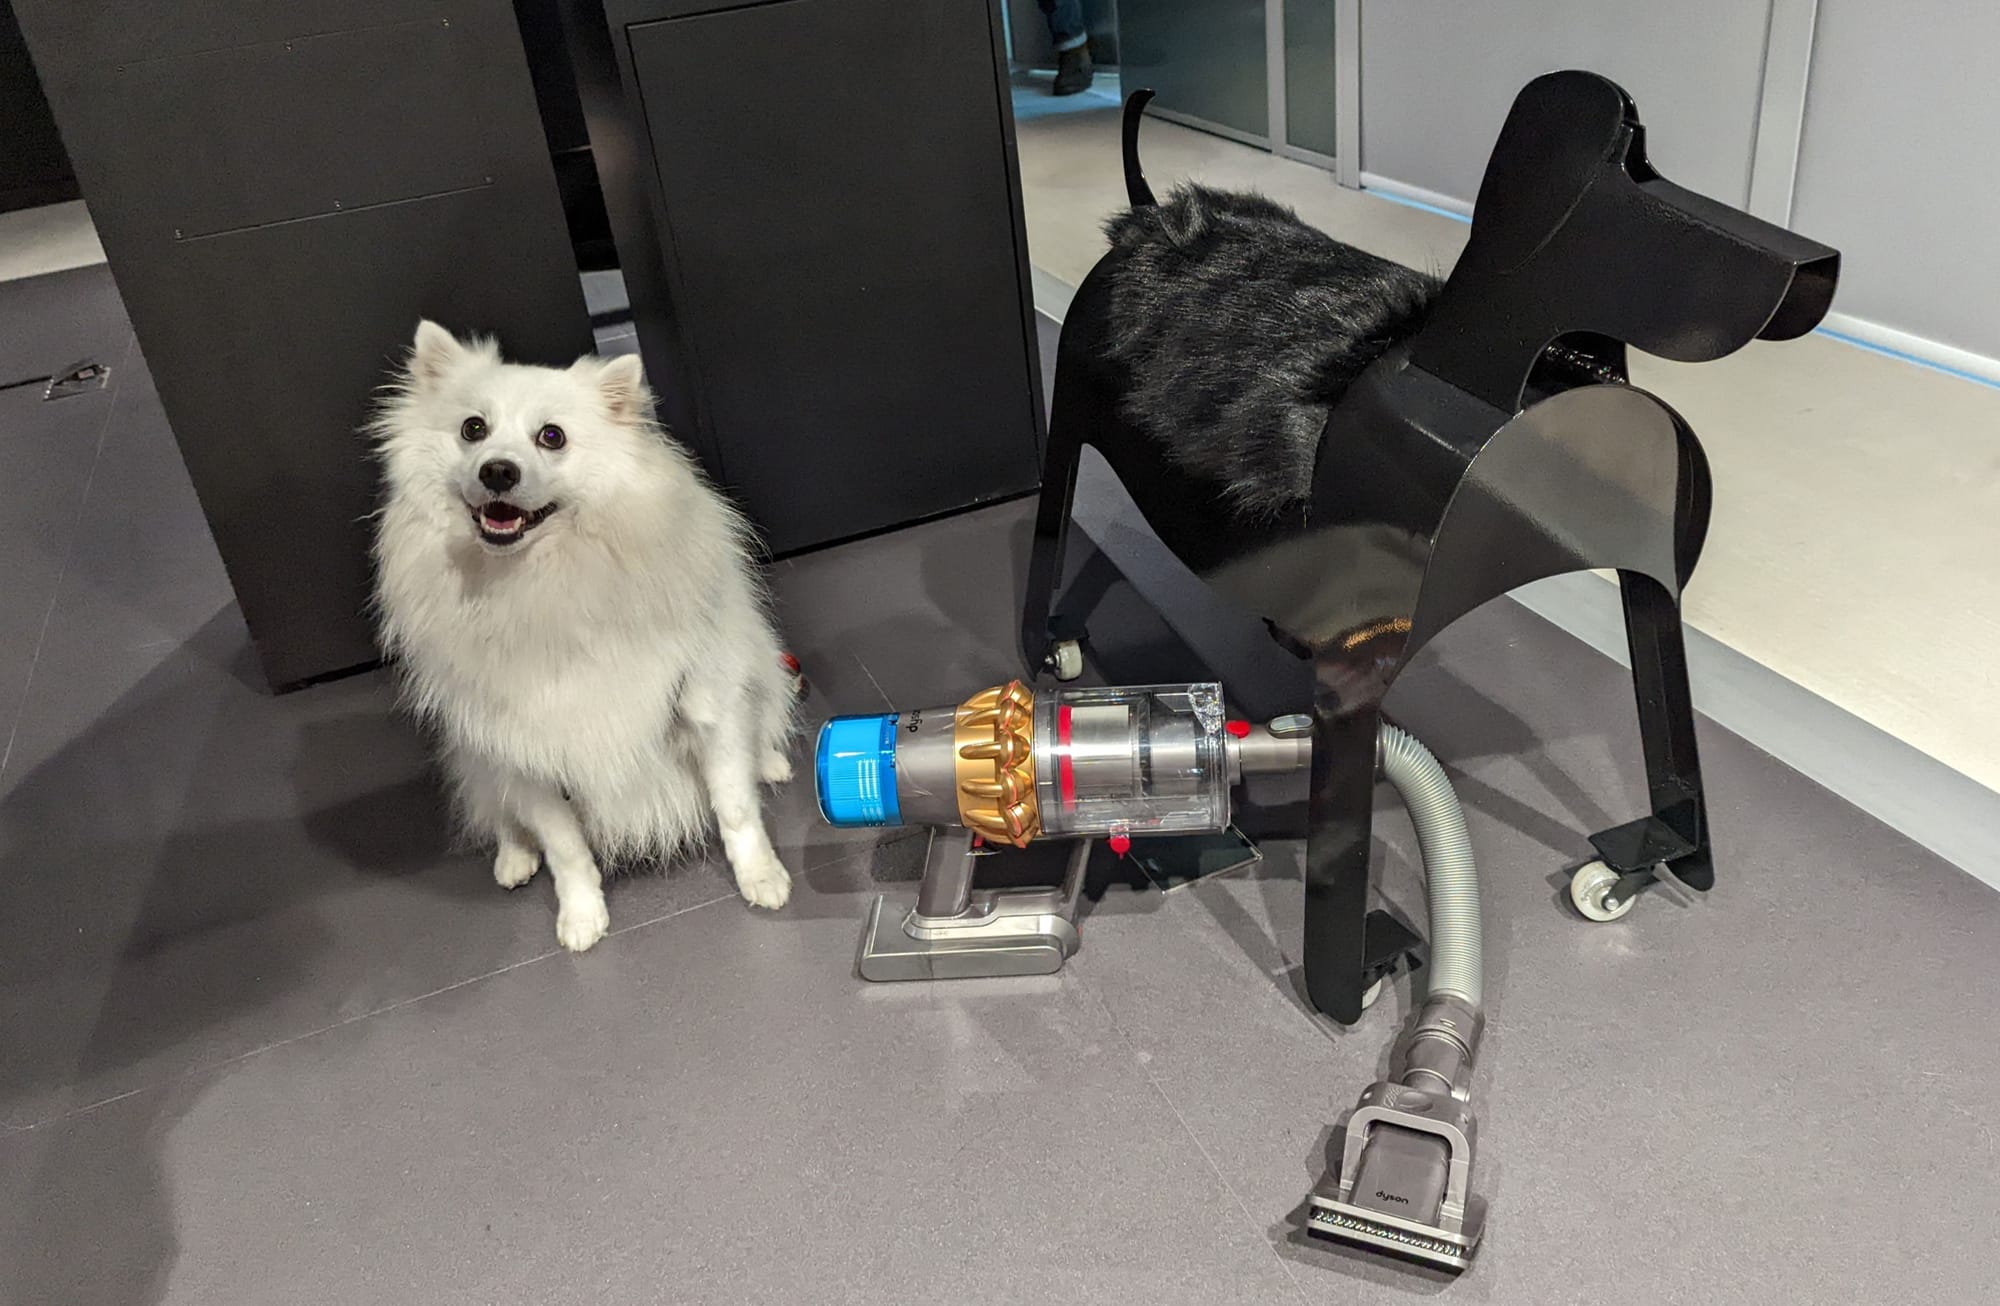 Dyson V15 Detect cordless vacuum cleaner arrives in Singapore along with new Pet Groom tool and cleaning attachments